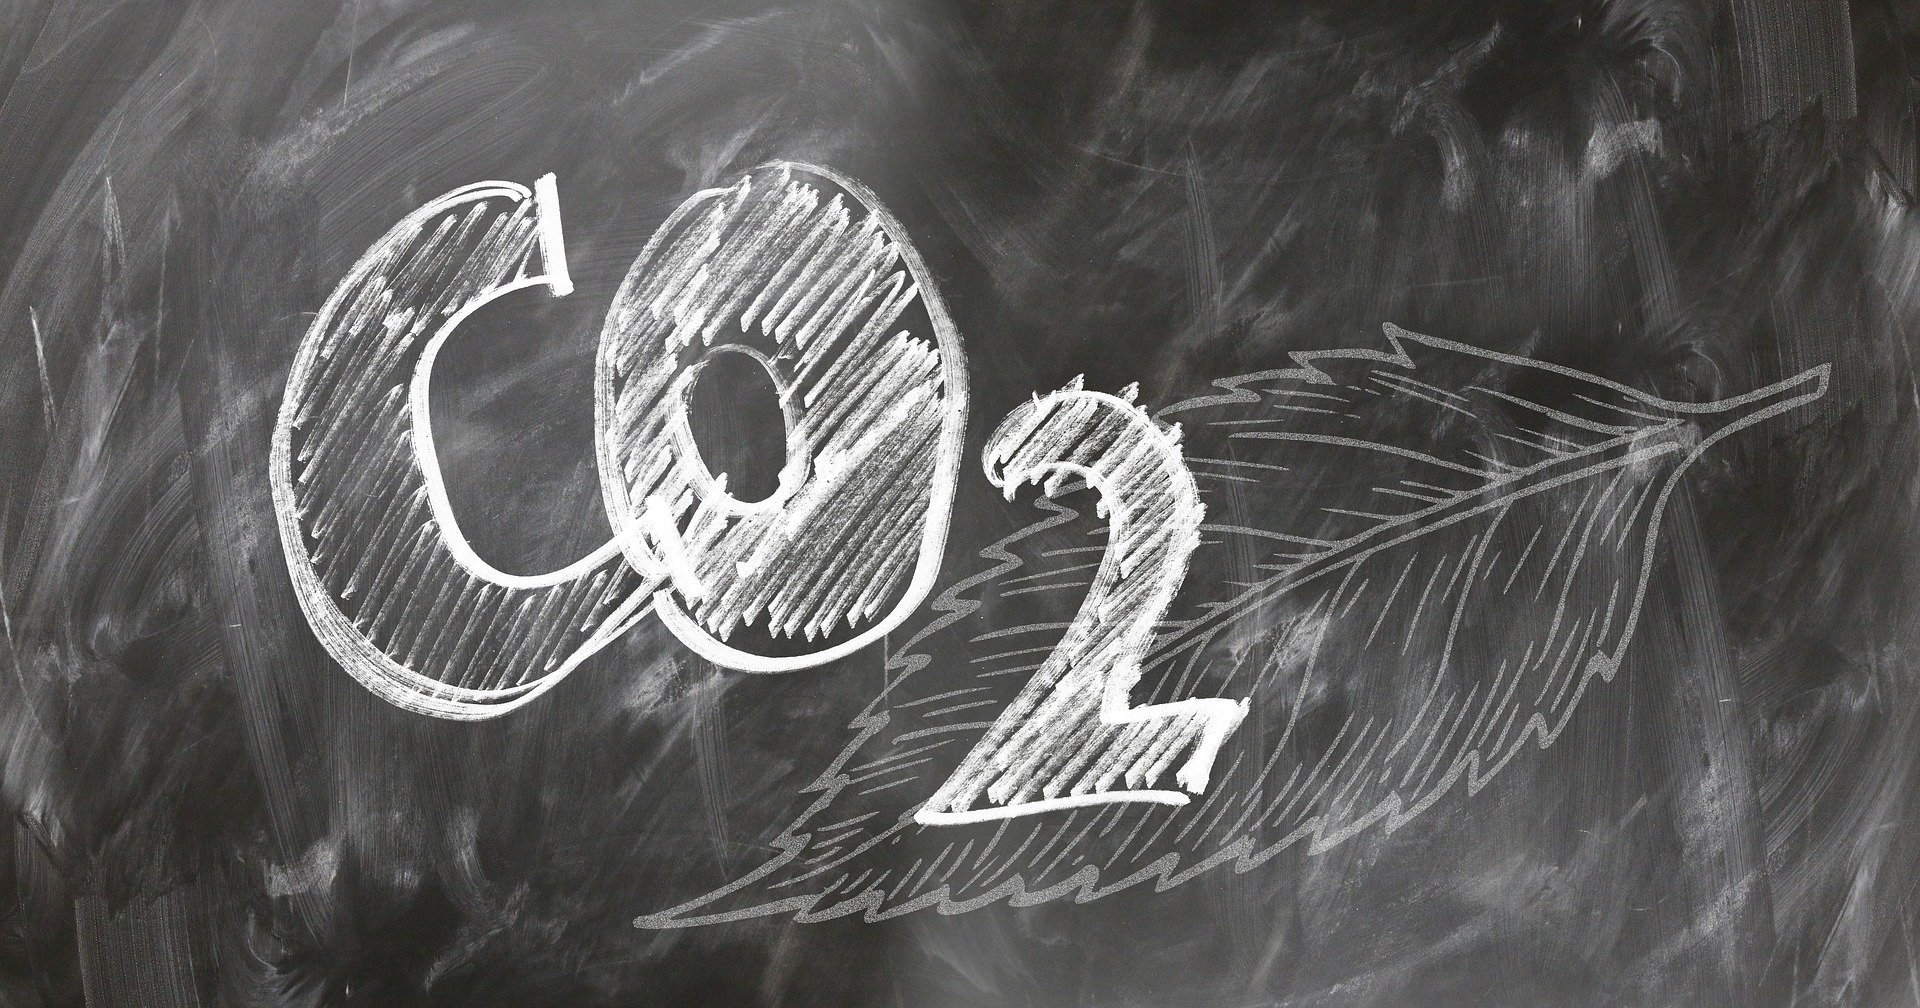 CO2-neutral doesn't necessarily mean an effective reduction in total greenhouse gas emissions